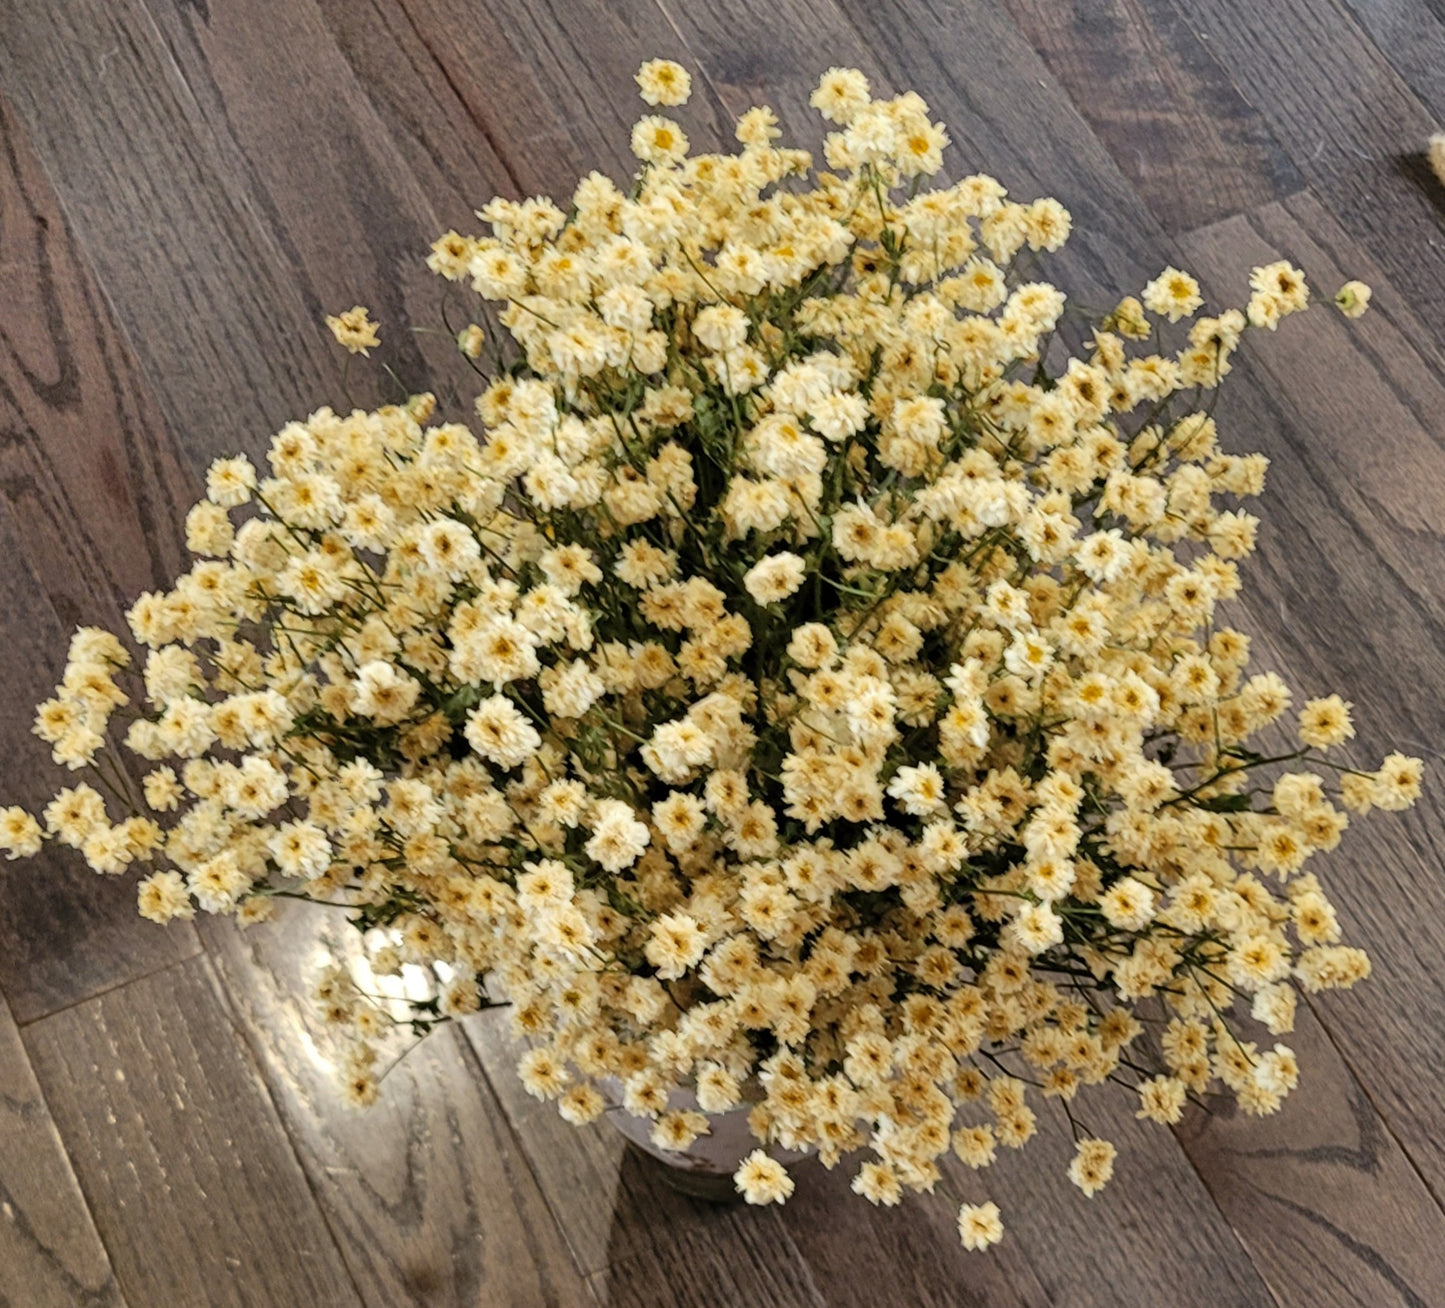 Dried Flowers in a ceramic vase